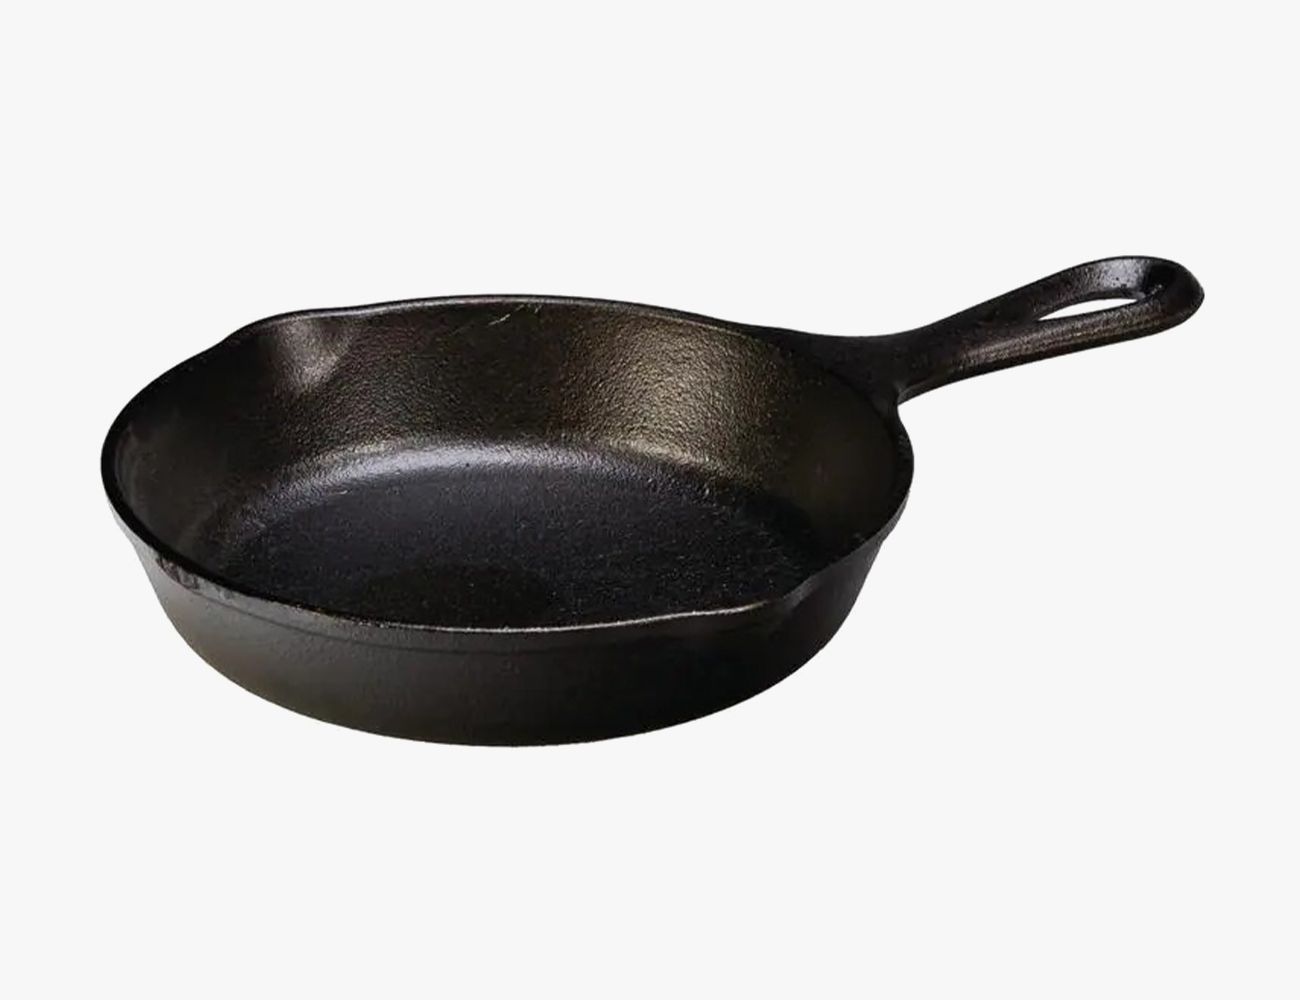 Pro Tip: The Lodge P14P Pizza Pan can be used as a lid for the Lodge 14SK Cast  Iron Skillet. What cast iron products do you use for things other than their